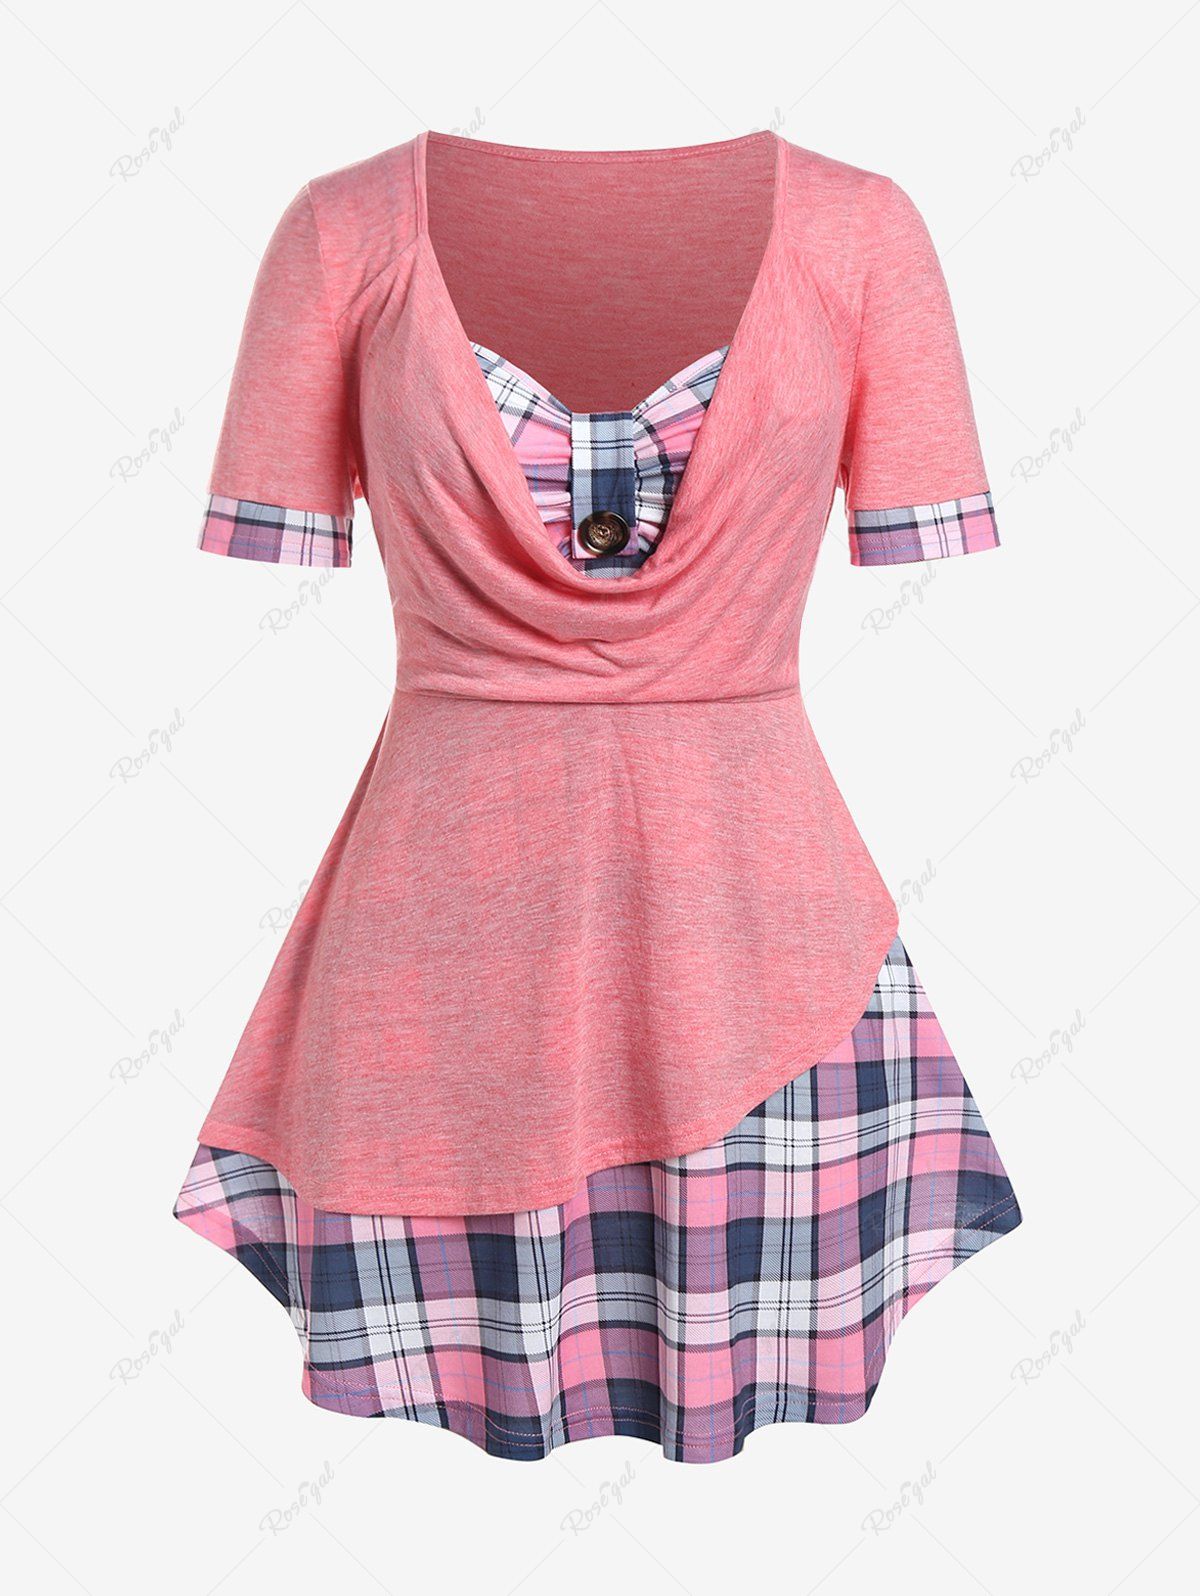 New Plus Size Cowl Neck Plaid 2 in 1 Tee  